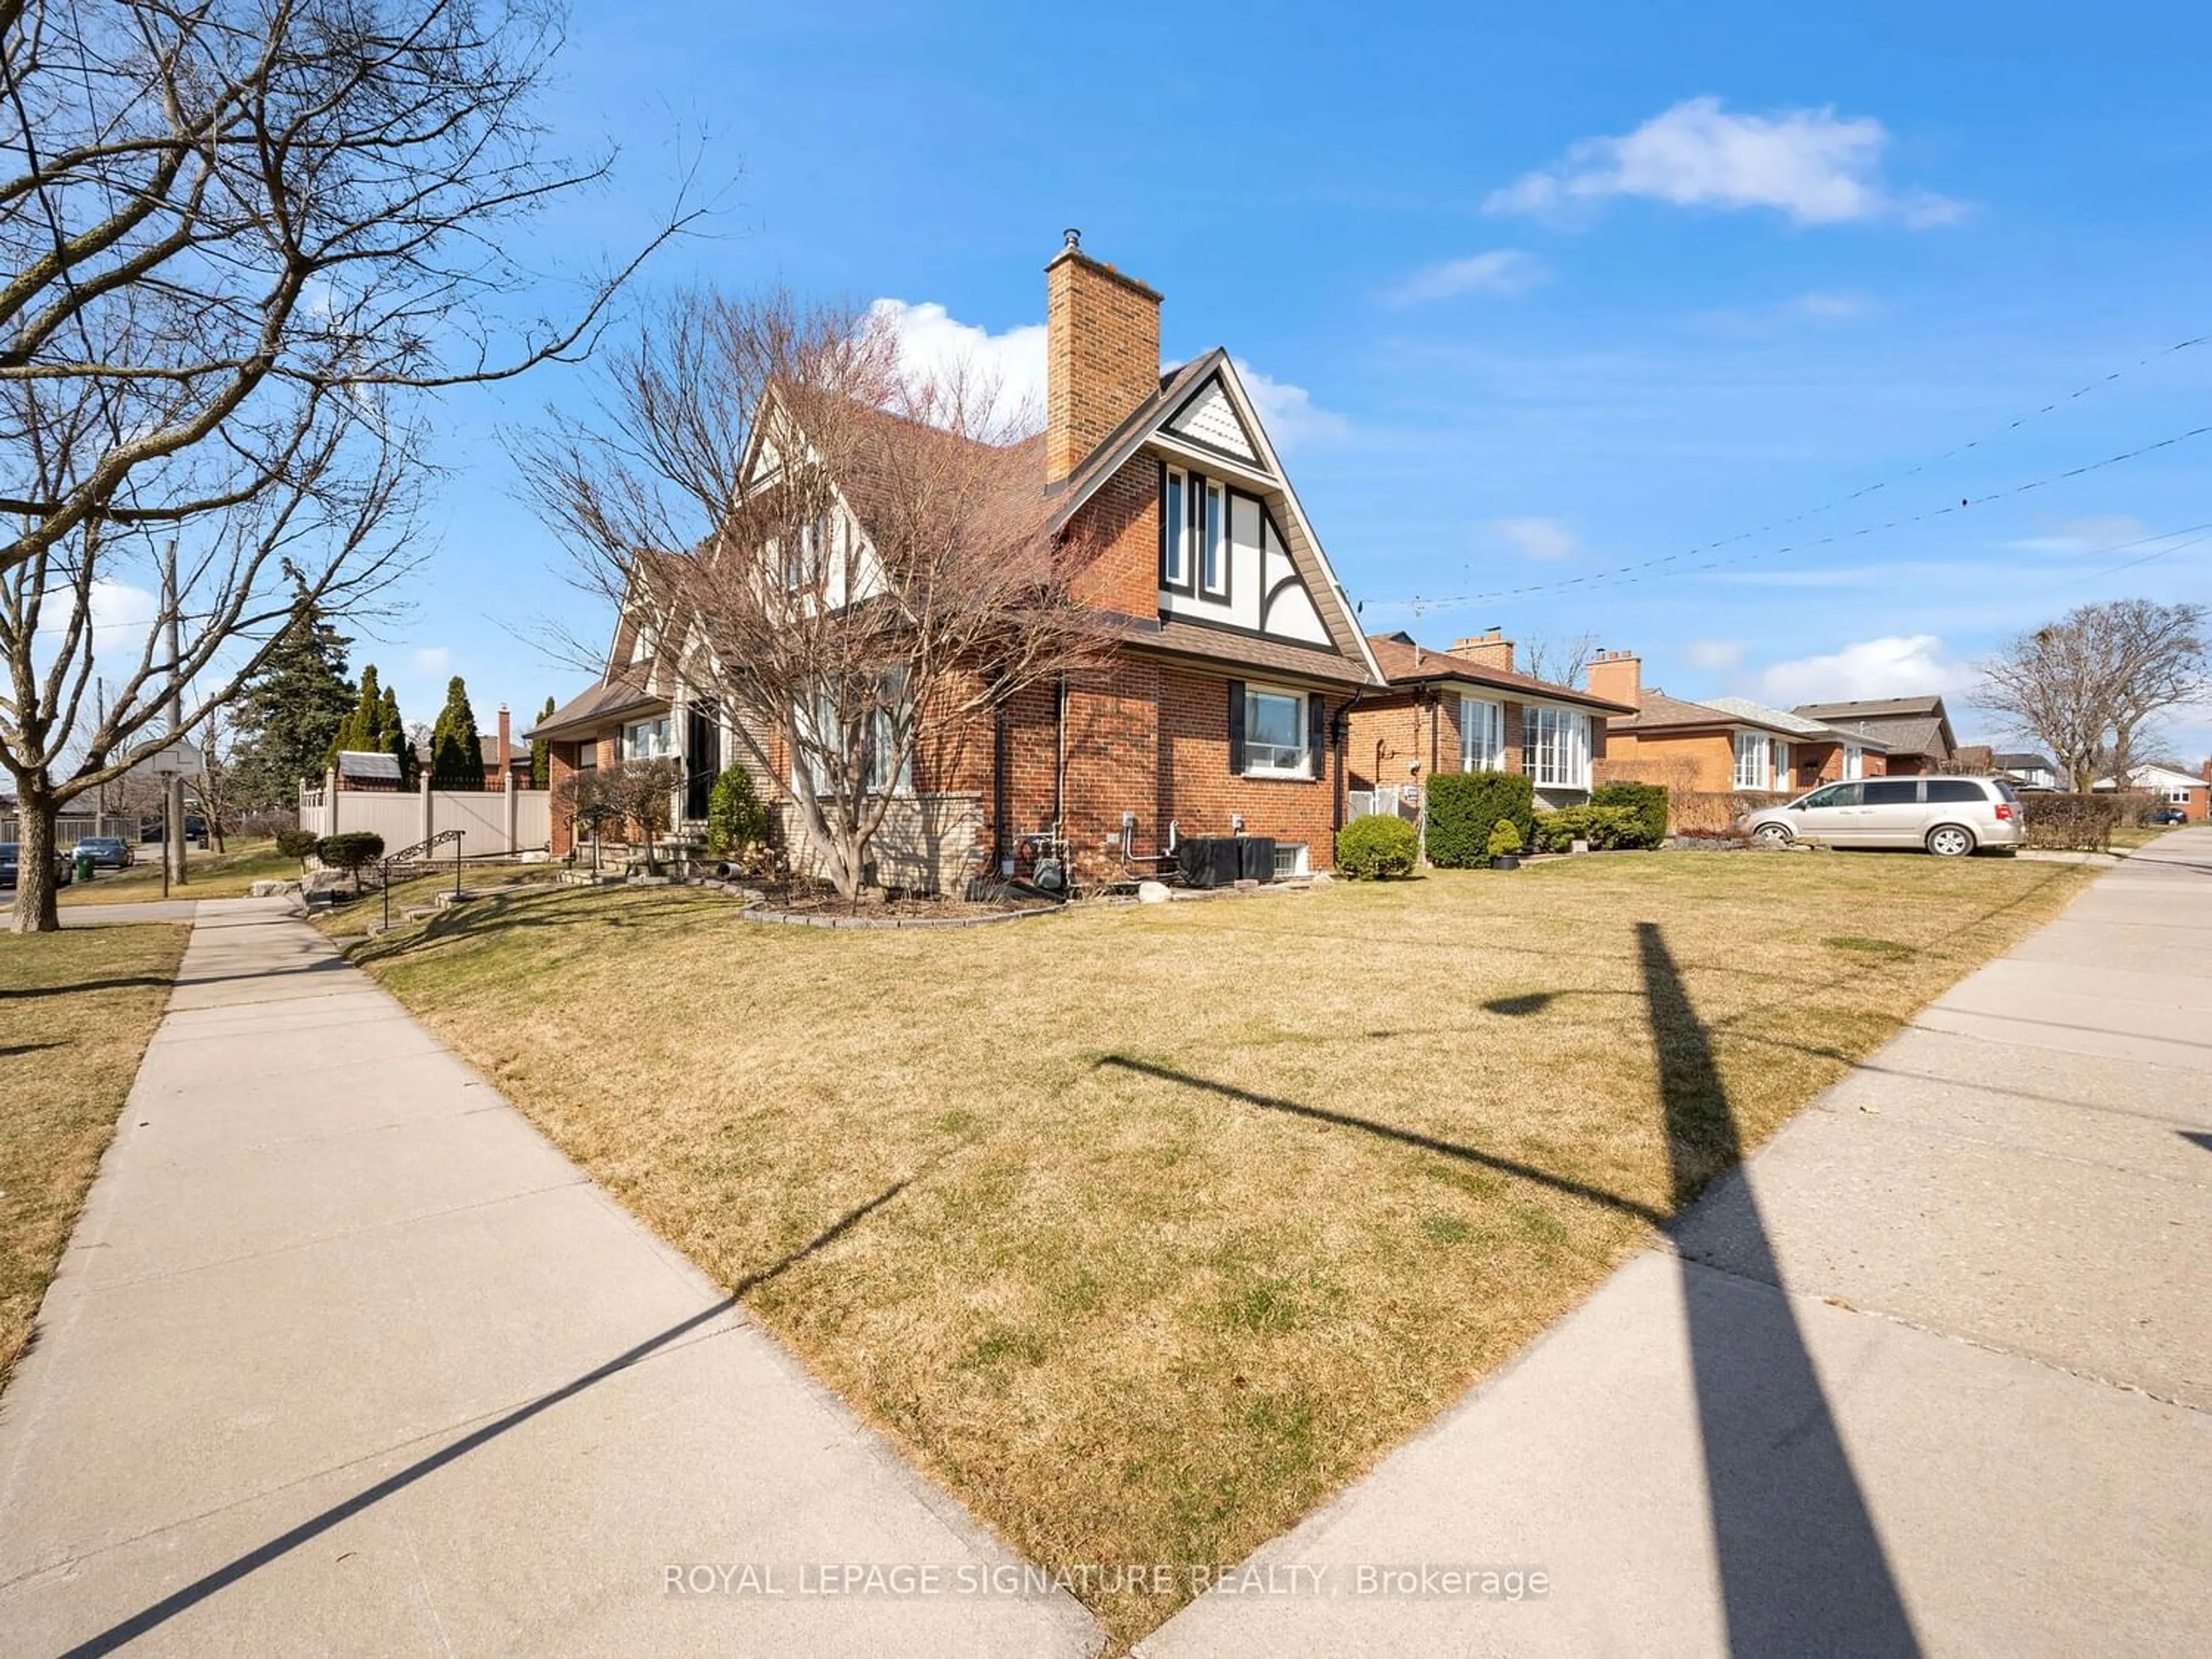 Frontside or backside of a home for 8 Peterlee Ave, Toronto Ontario M9B 1J2